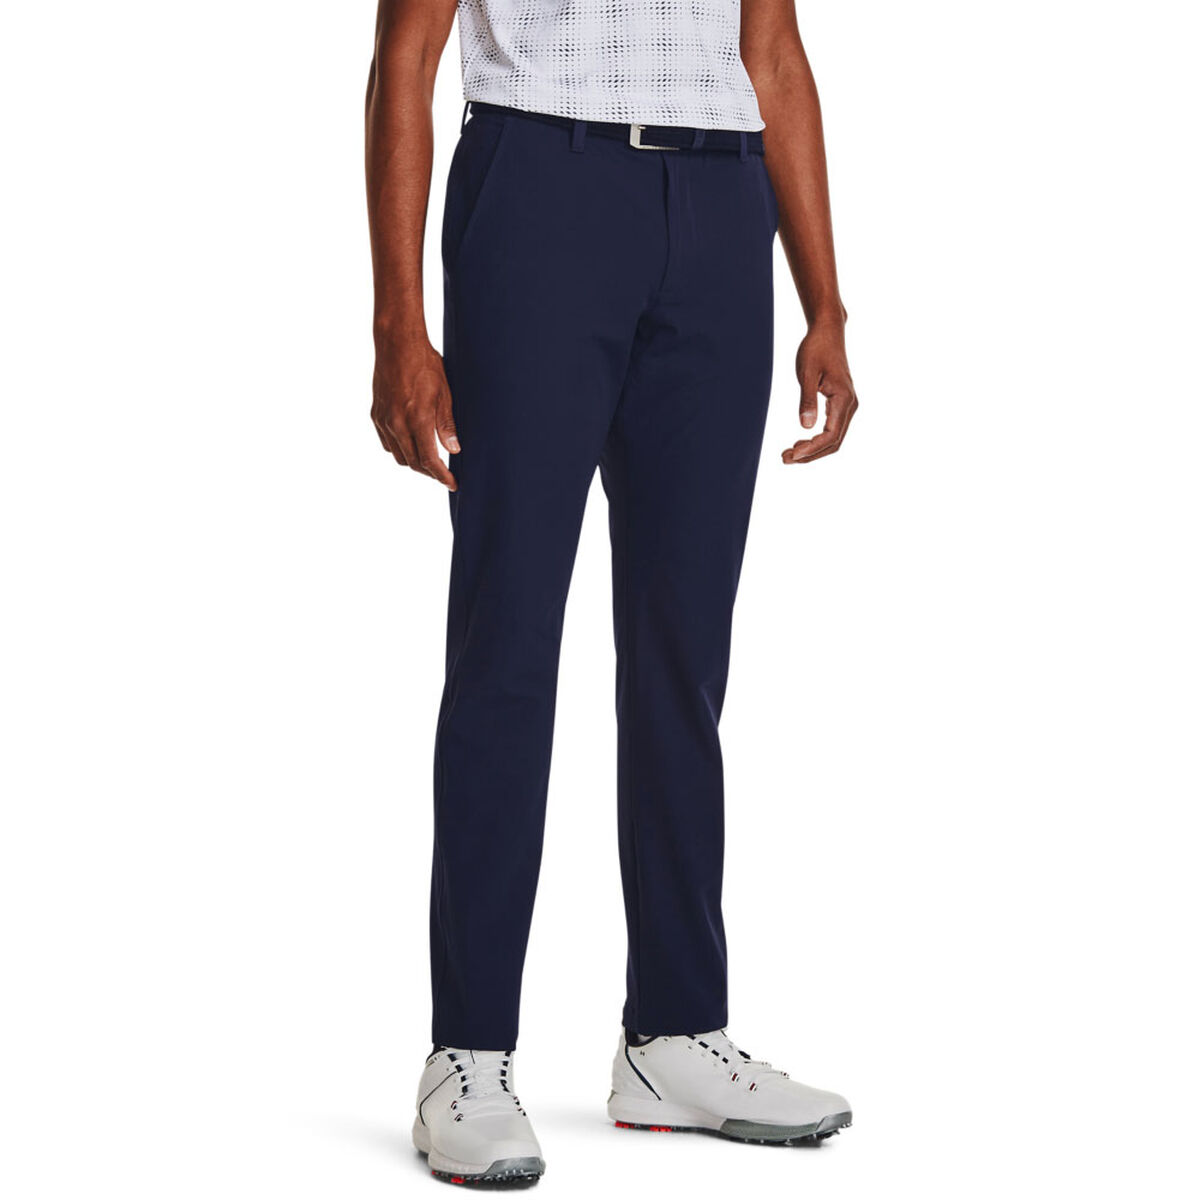 Under Armour Men's Navy Blue and Grey Knitted Drive Tapered Long Fit Golf Trousers, Size: 36 | American Golf von Under Armour